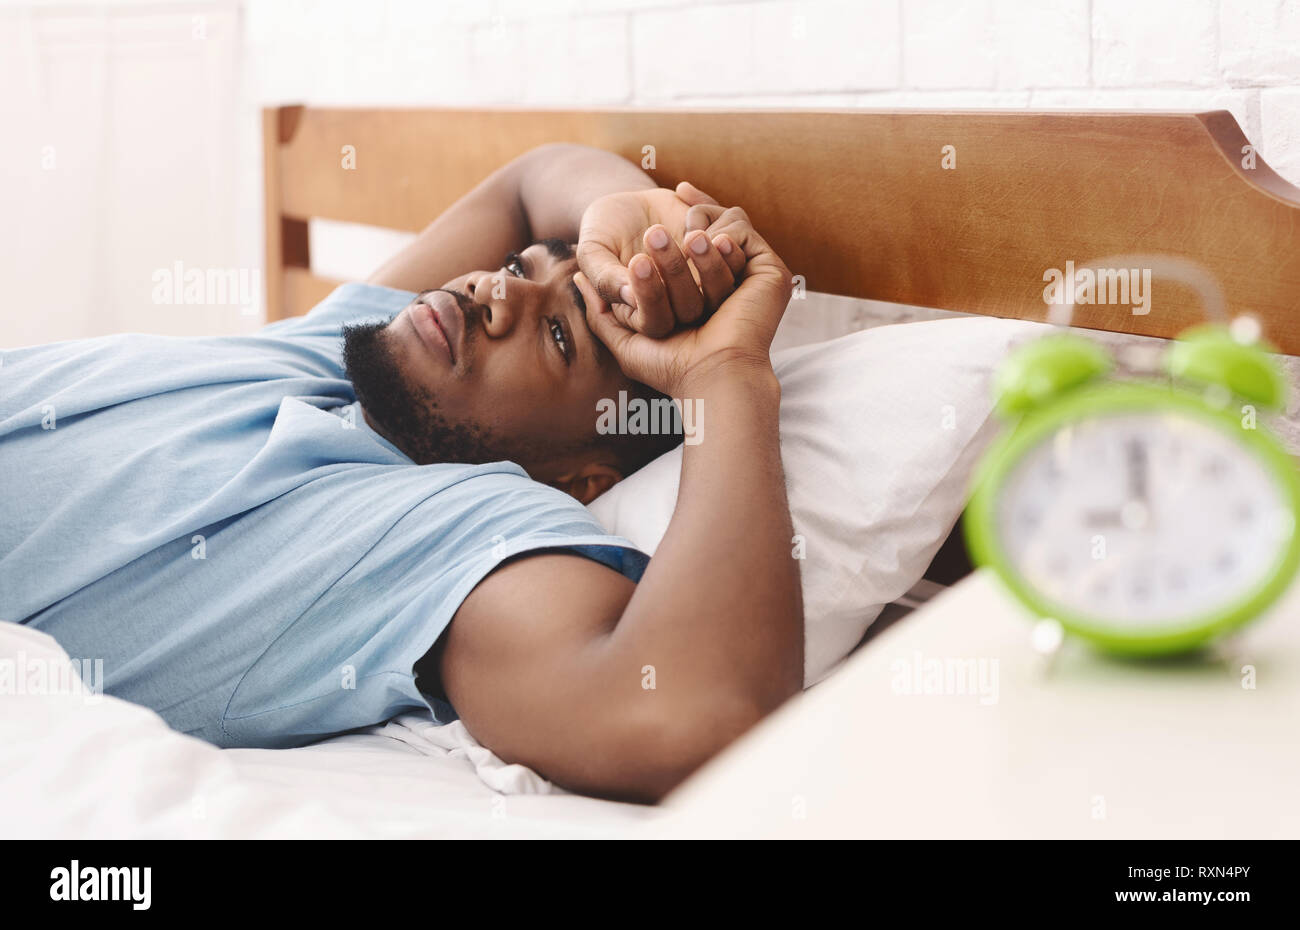 Black man in bed suffering from insomnia and sleep disorder Stock Photo